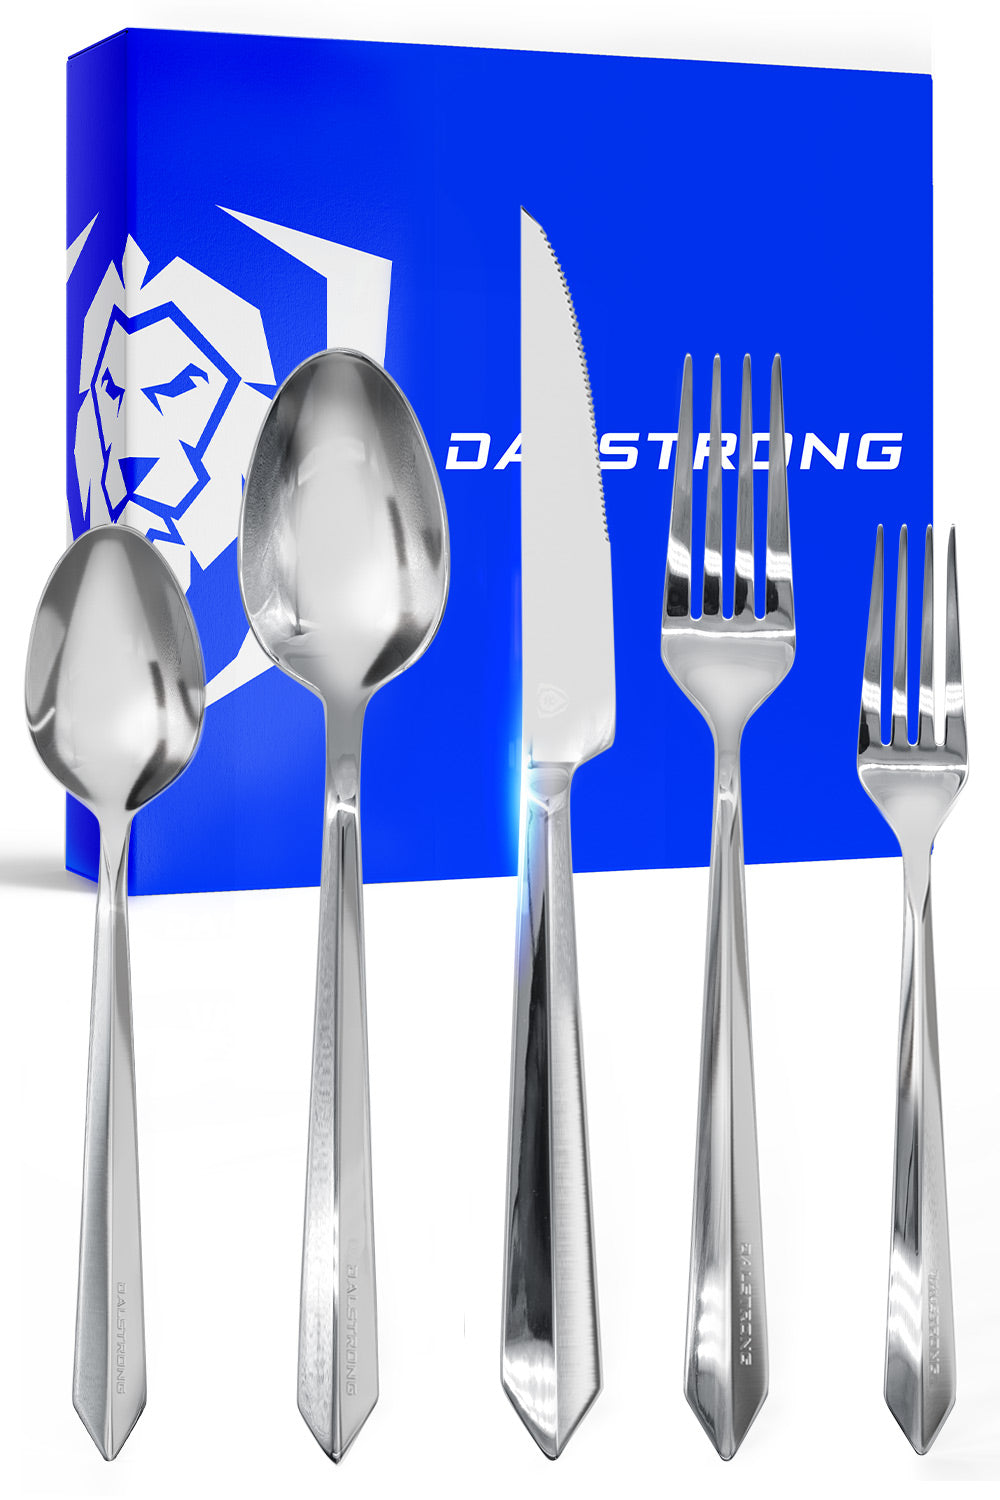 20-Piece Flatware Cutlery Set | Silver Stainless Steel | Service for 4 | Dalstrong ©